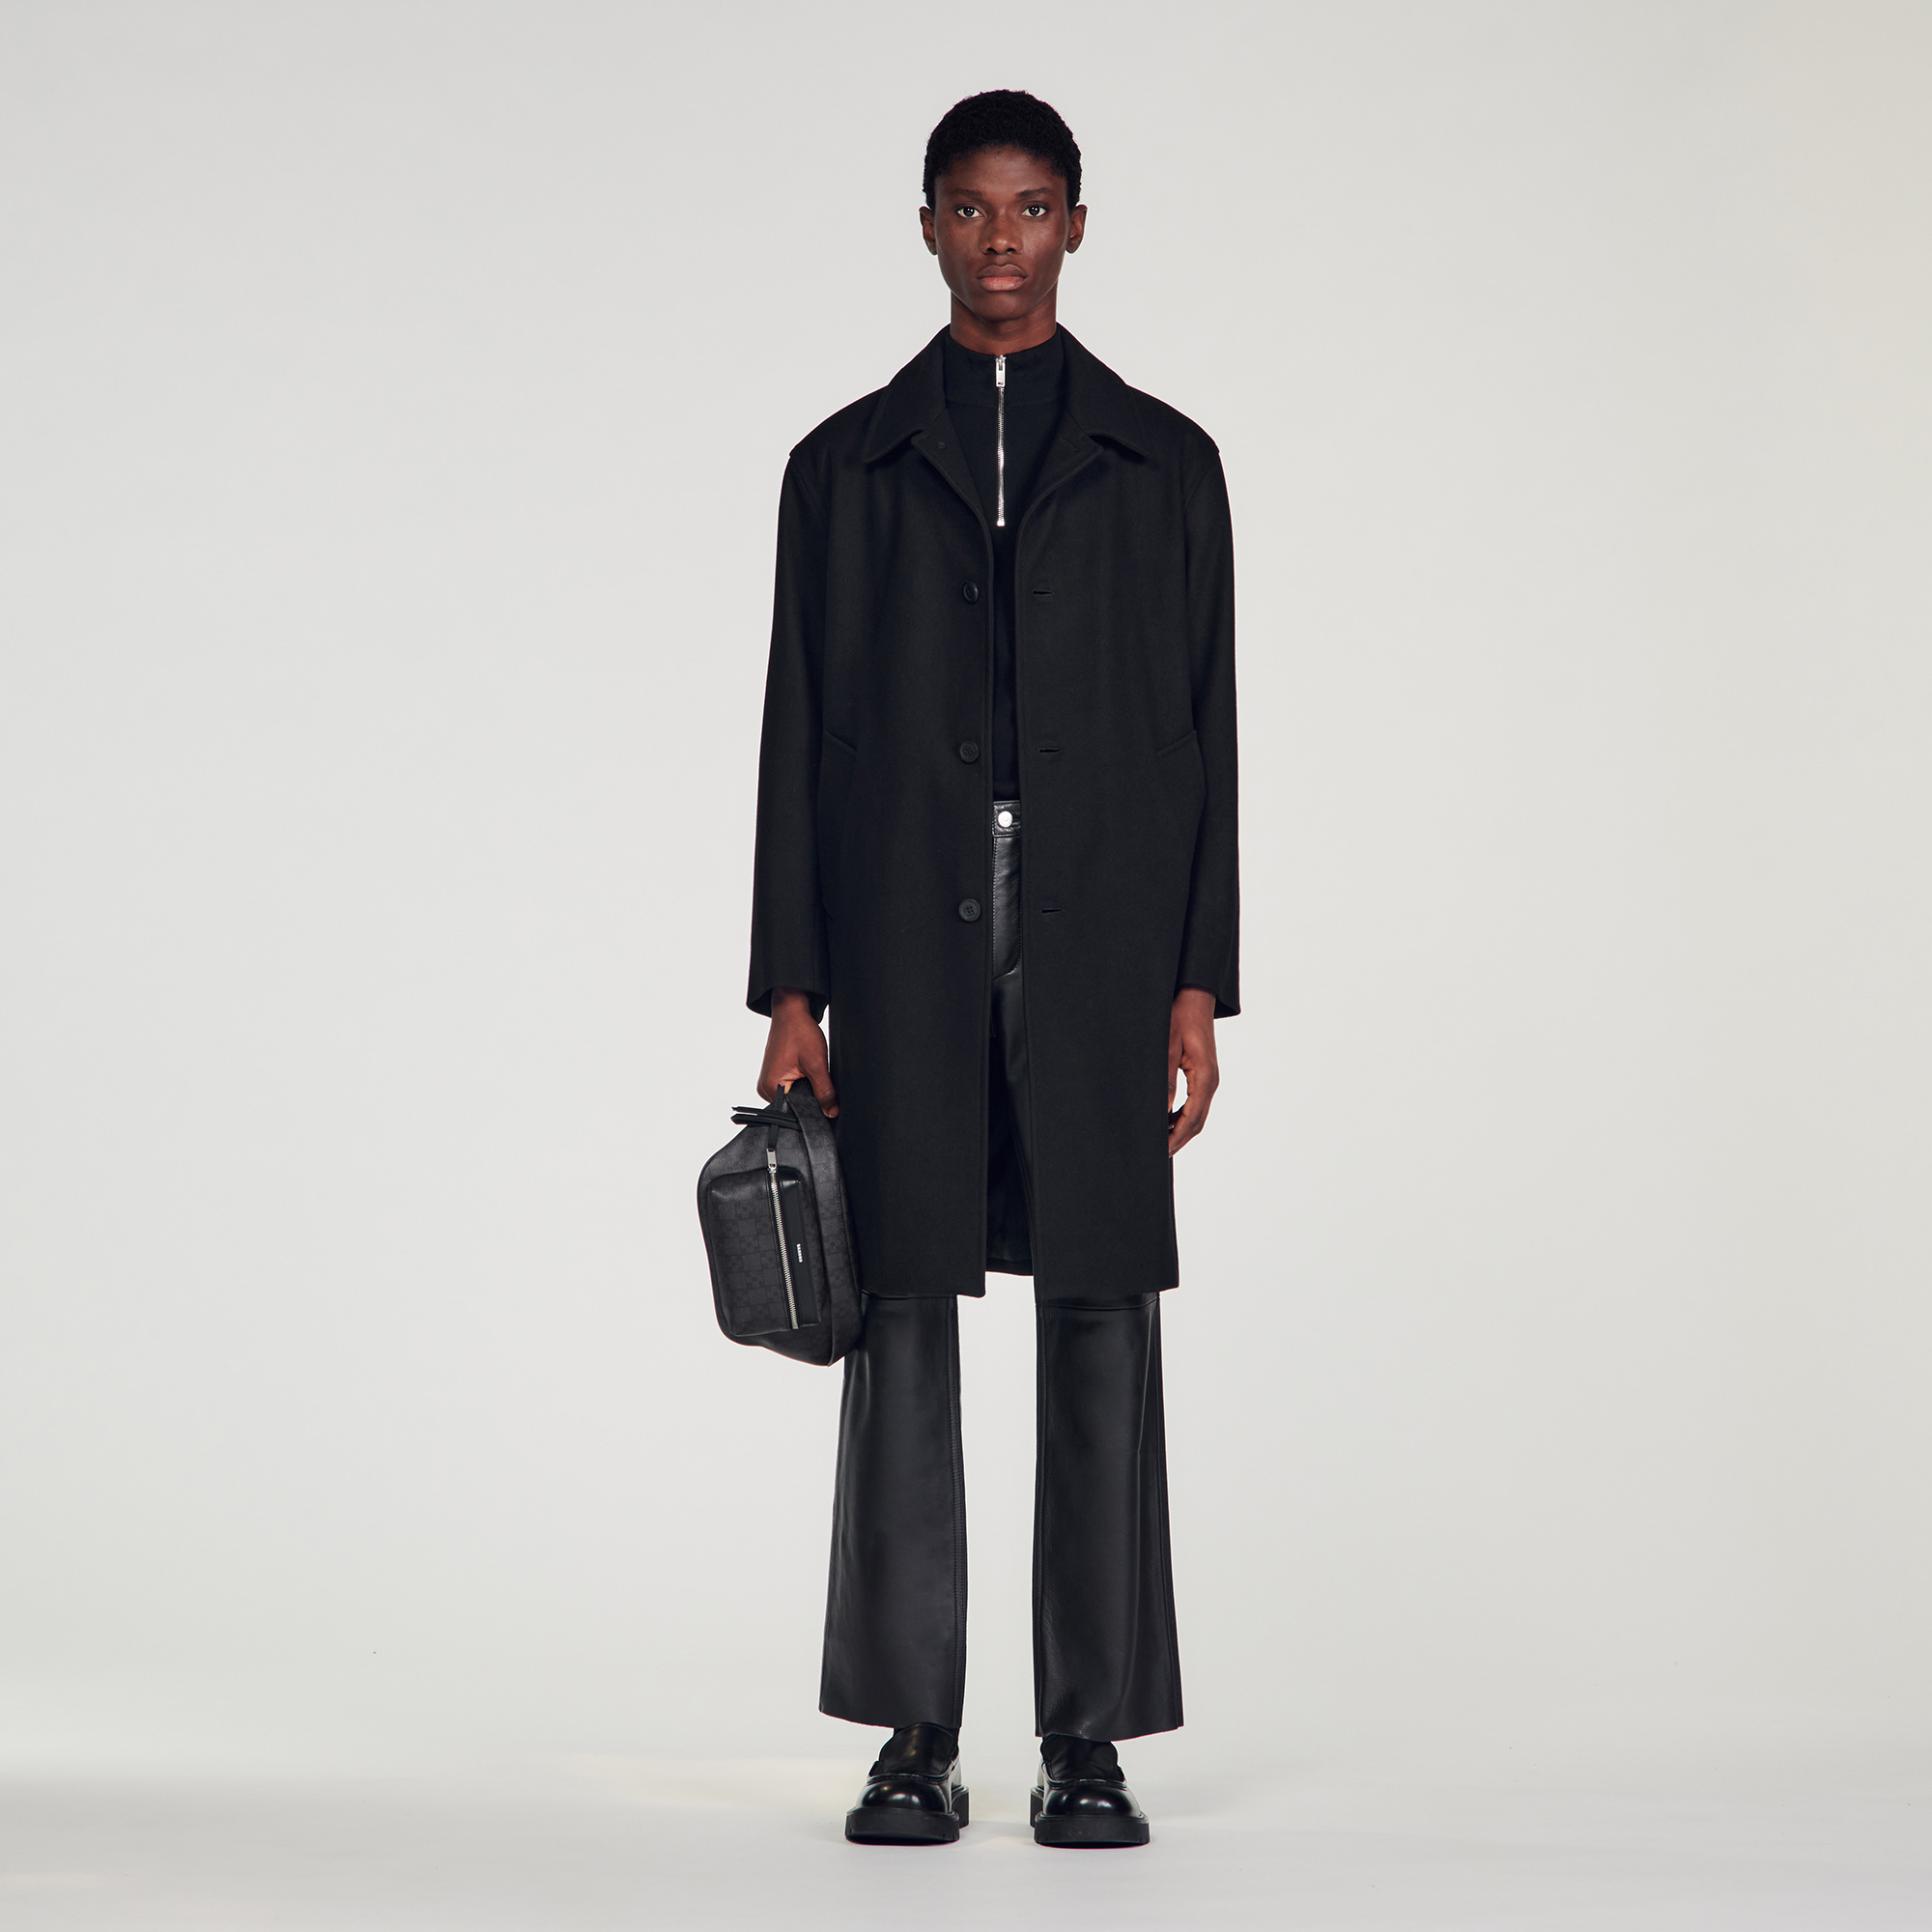 Sandro wool Wool and cashmere blend coat with long sleeves, button fastening, side pockets and back vent